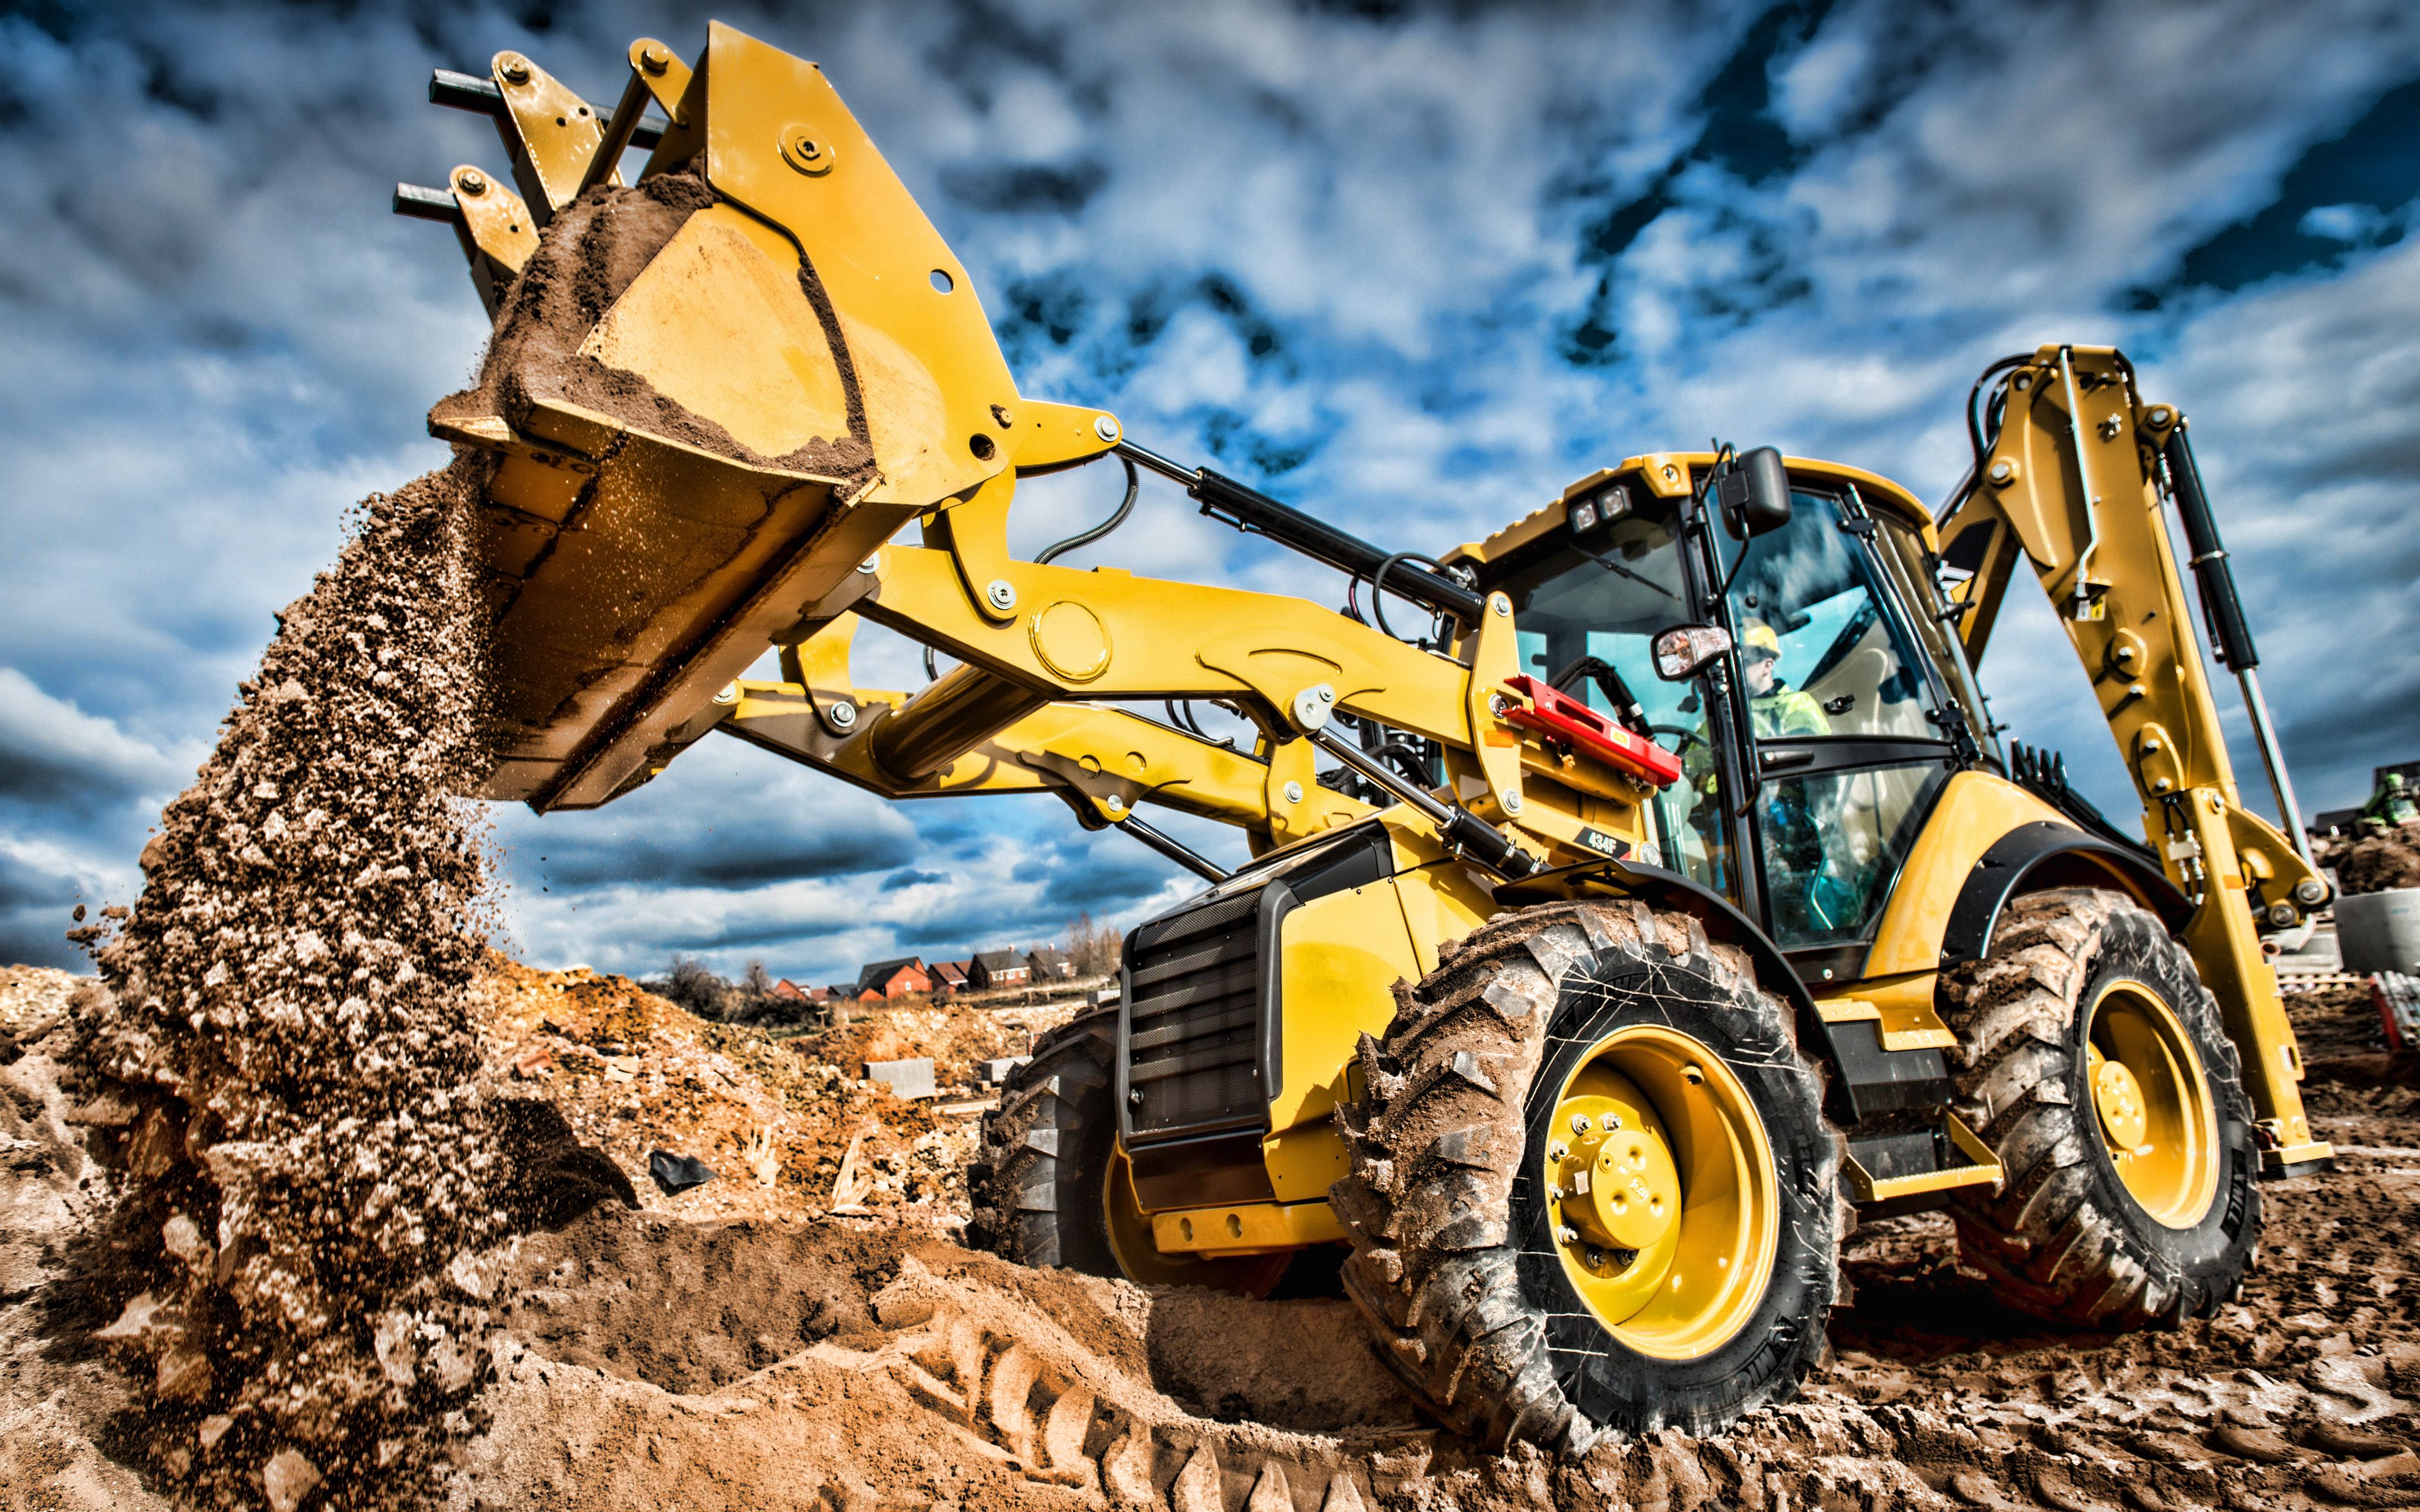 Download wallpaper Caterpillar 434F, 4k, HDR, Backhoe loader, construction vehicles, Cat 434F, special equipment, excavators, Caterpillar for desktop with resolution 3840x2400. High Quality HD picture wallpaper